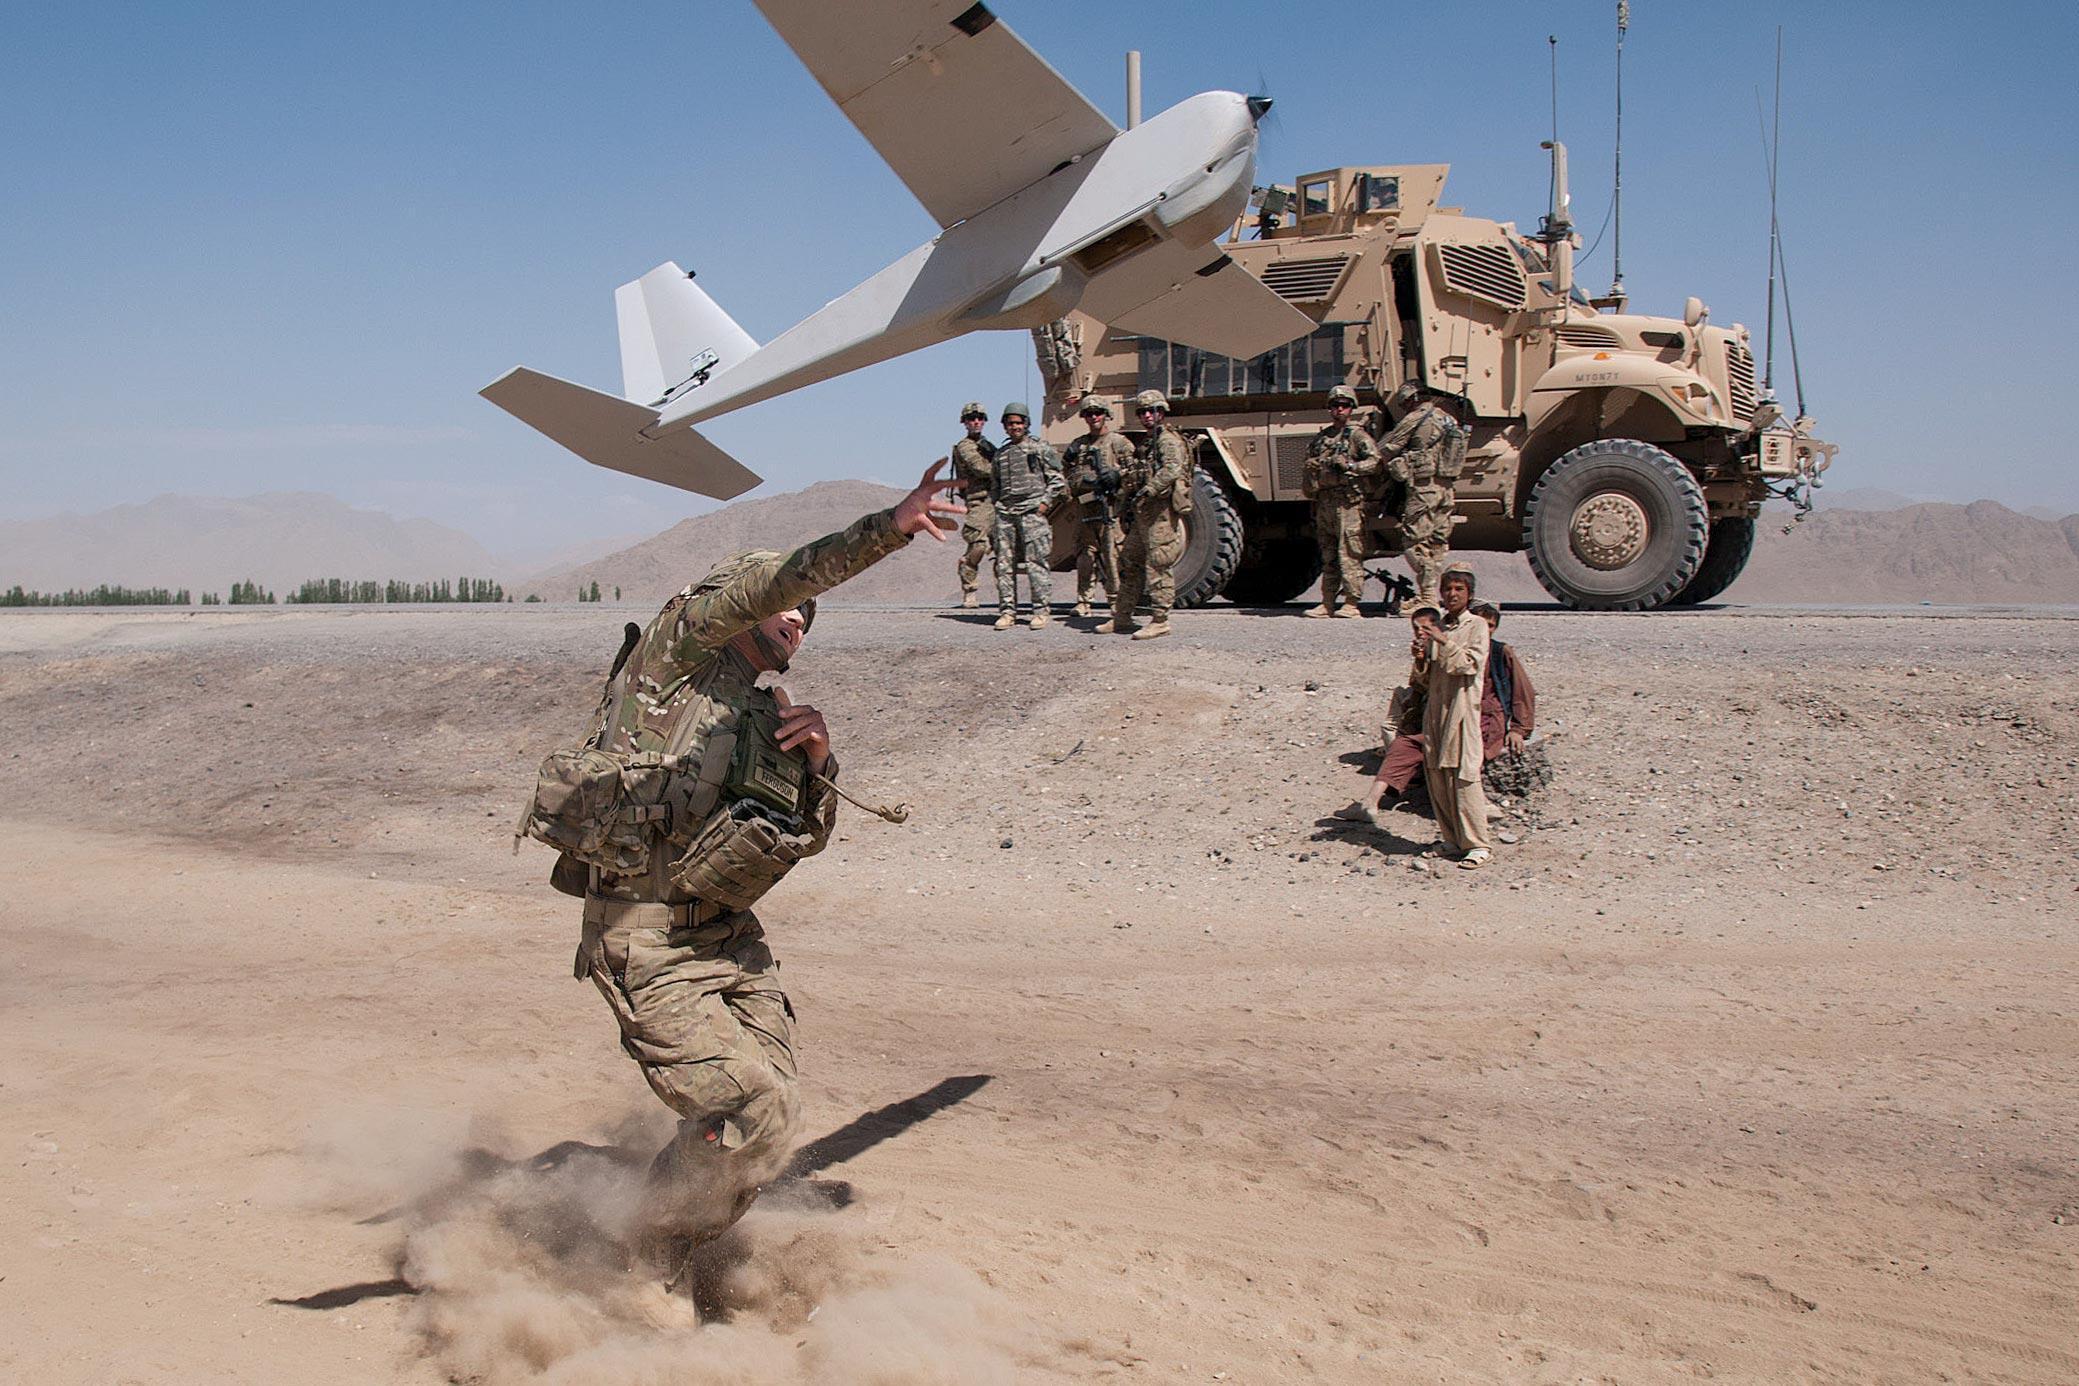 From Puma to SwitchBlade AeroVironment's systems assisting Ukraine - Unmanned Network